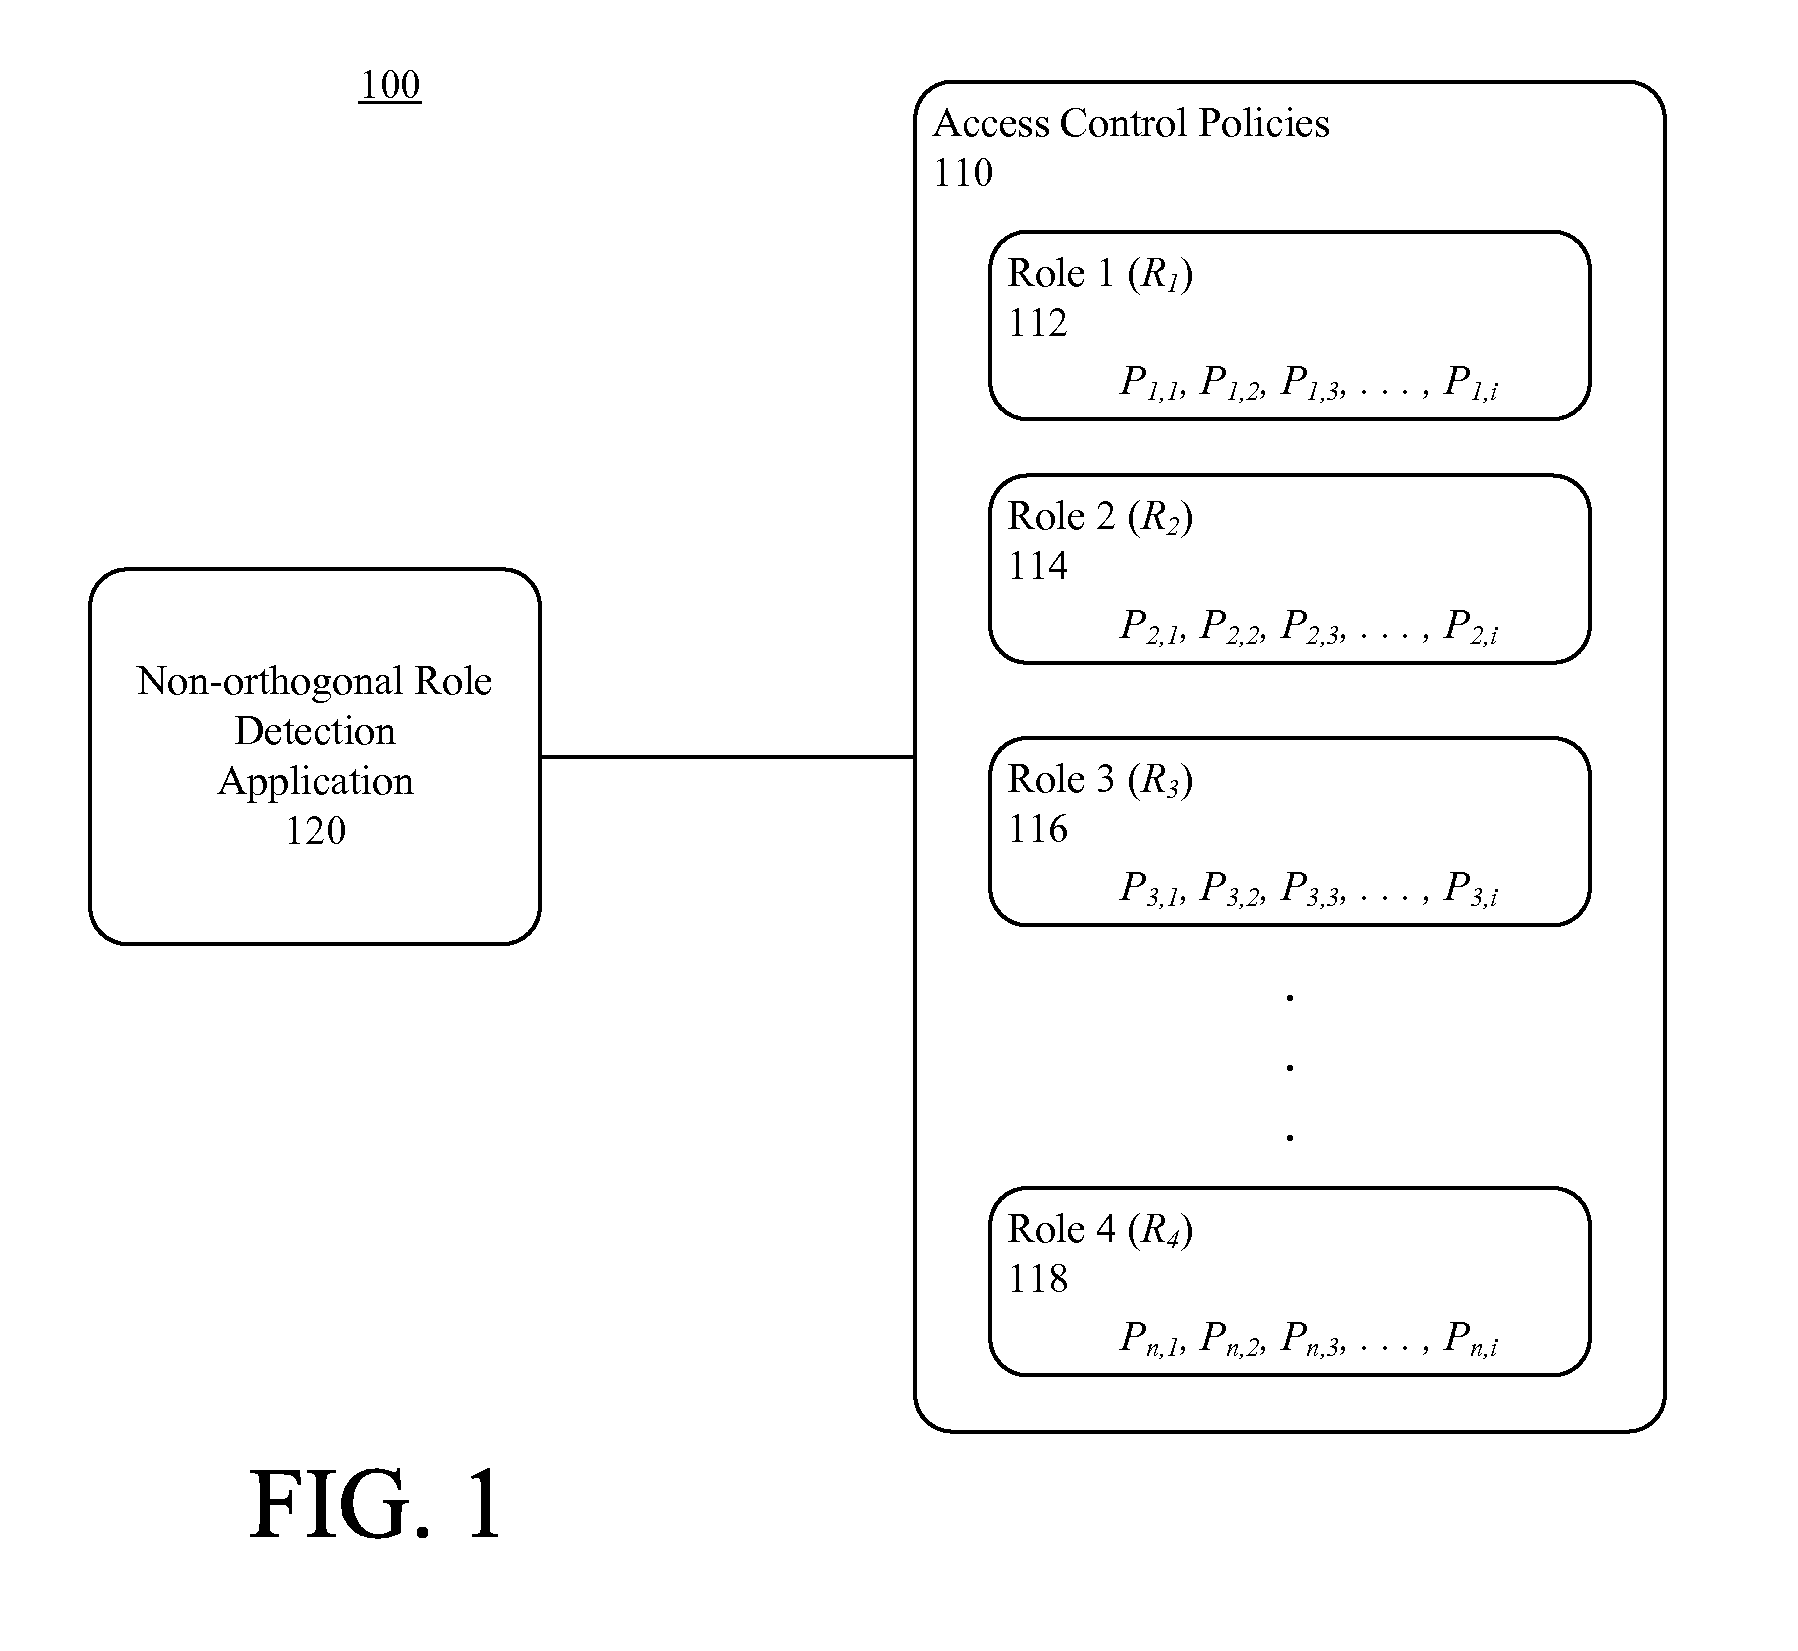 Identifying non-orthogonal roles in a role based access control system